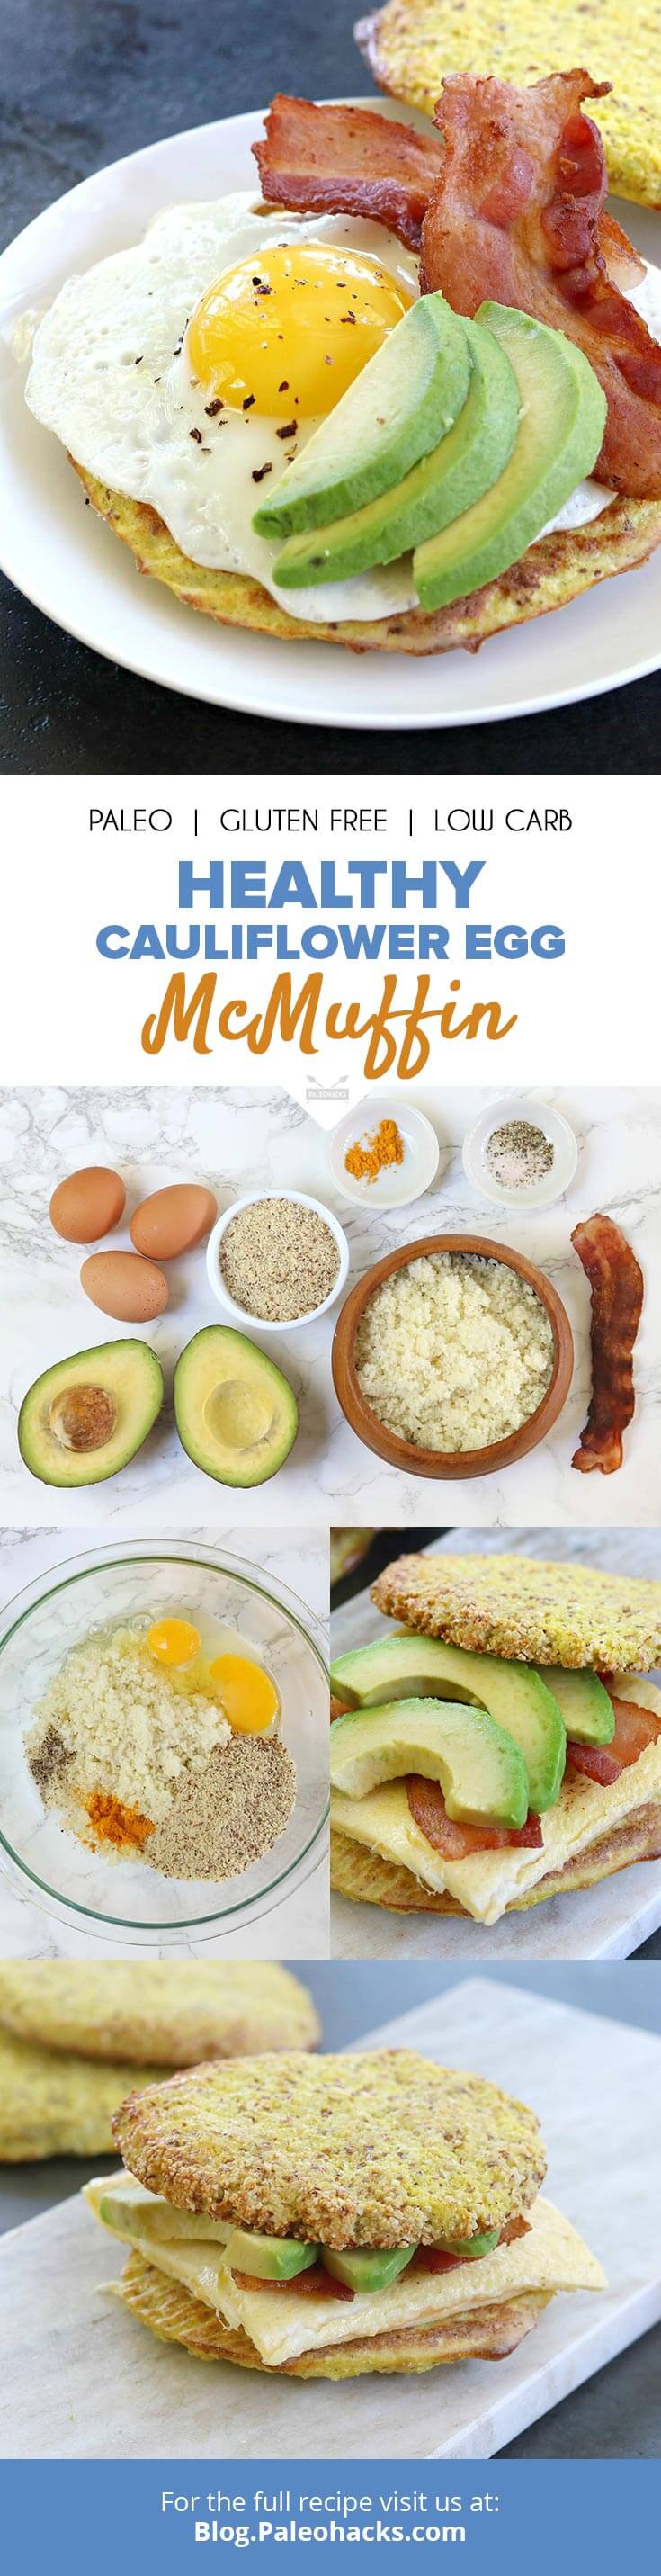 The fast food breakfast sandwich you hate to love gets a Paleo upgrade with turmeric-spiced cauliflower "McMuffins" with fresh eggs and slices of avocado.